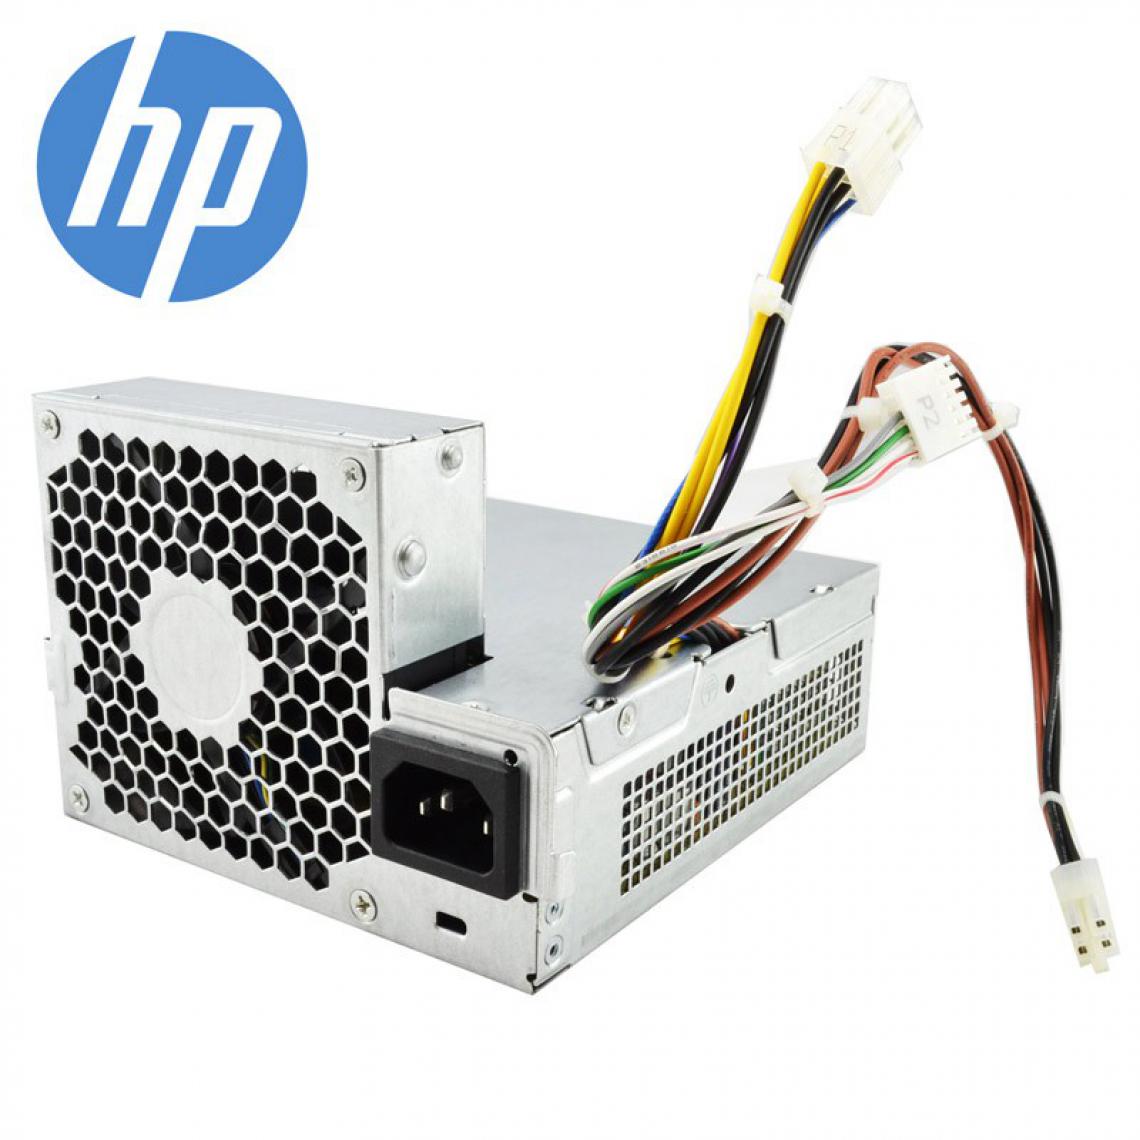 Hp - Alimentation HP Elite 6000/6005/6200 SFF PS-4241-9HA 503376-001 240W Power Supply - Alimentation modulaire